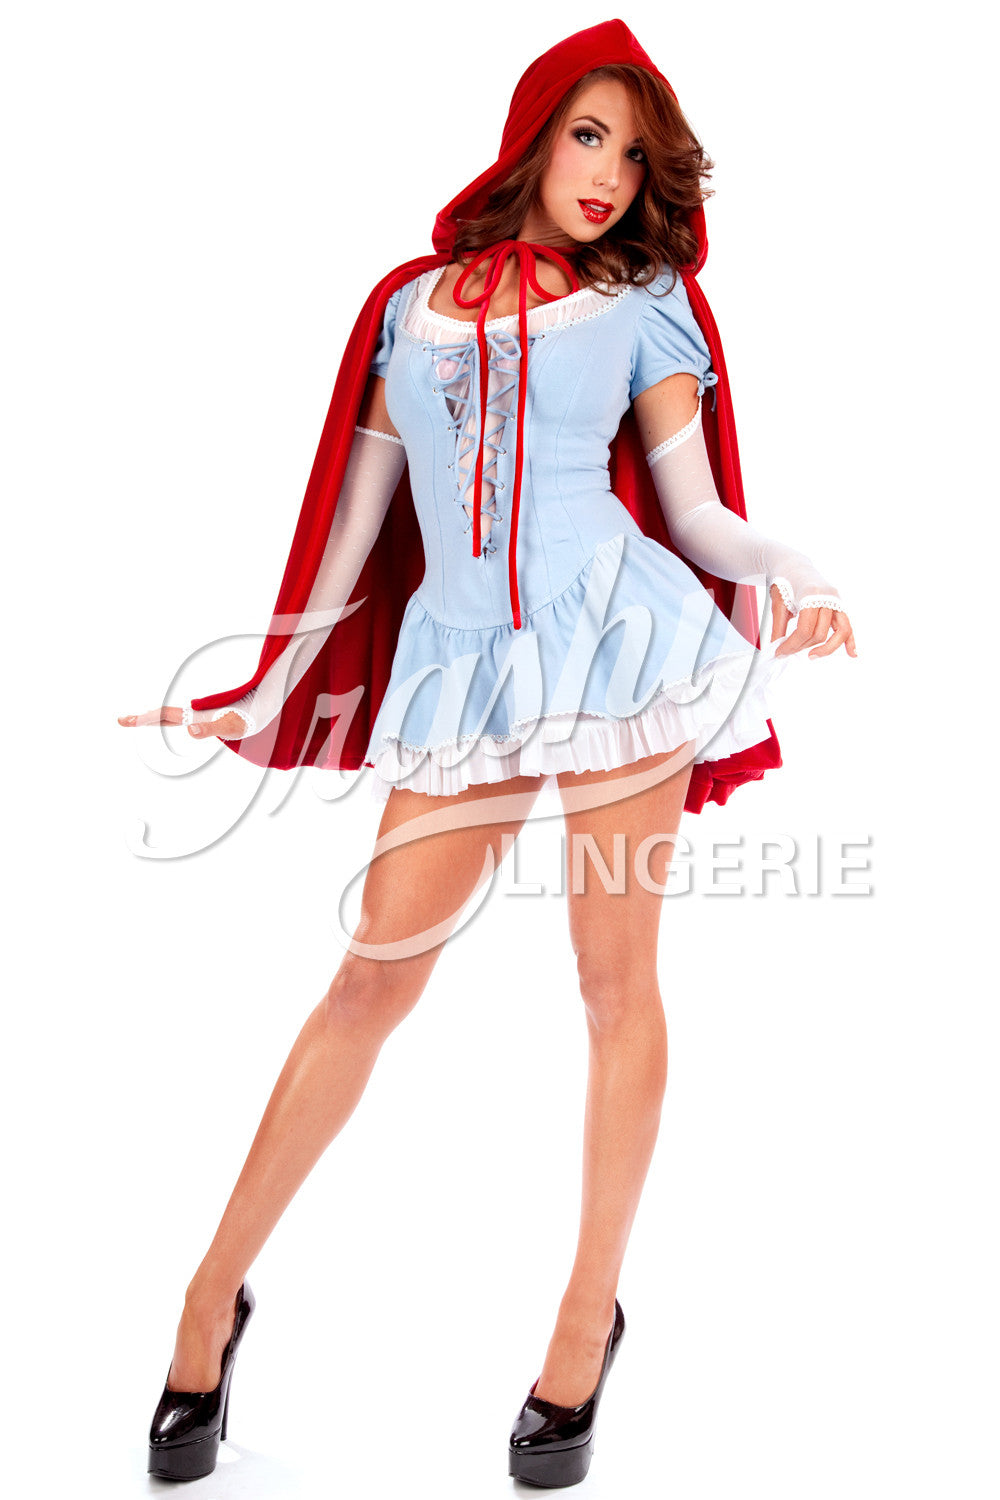 Hollywood Red Riding Hood Dress